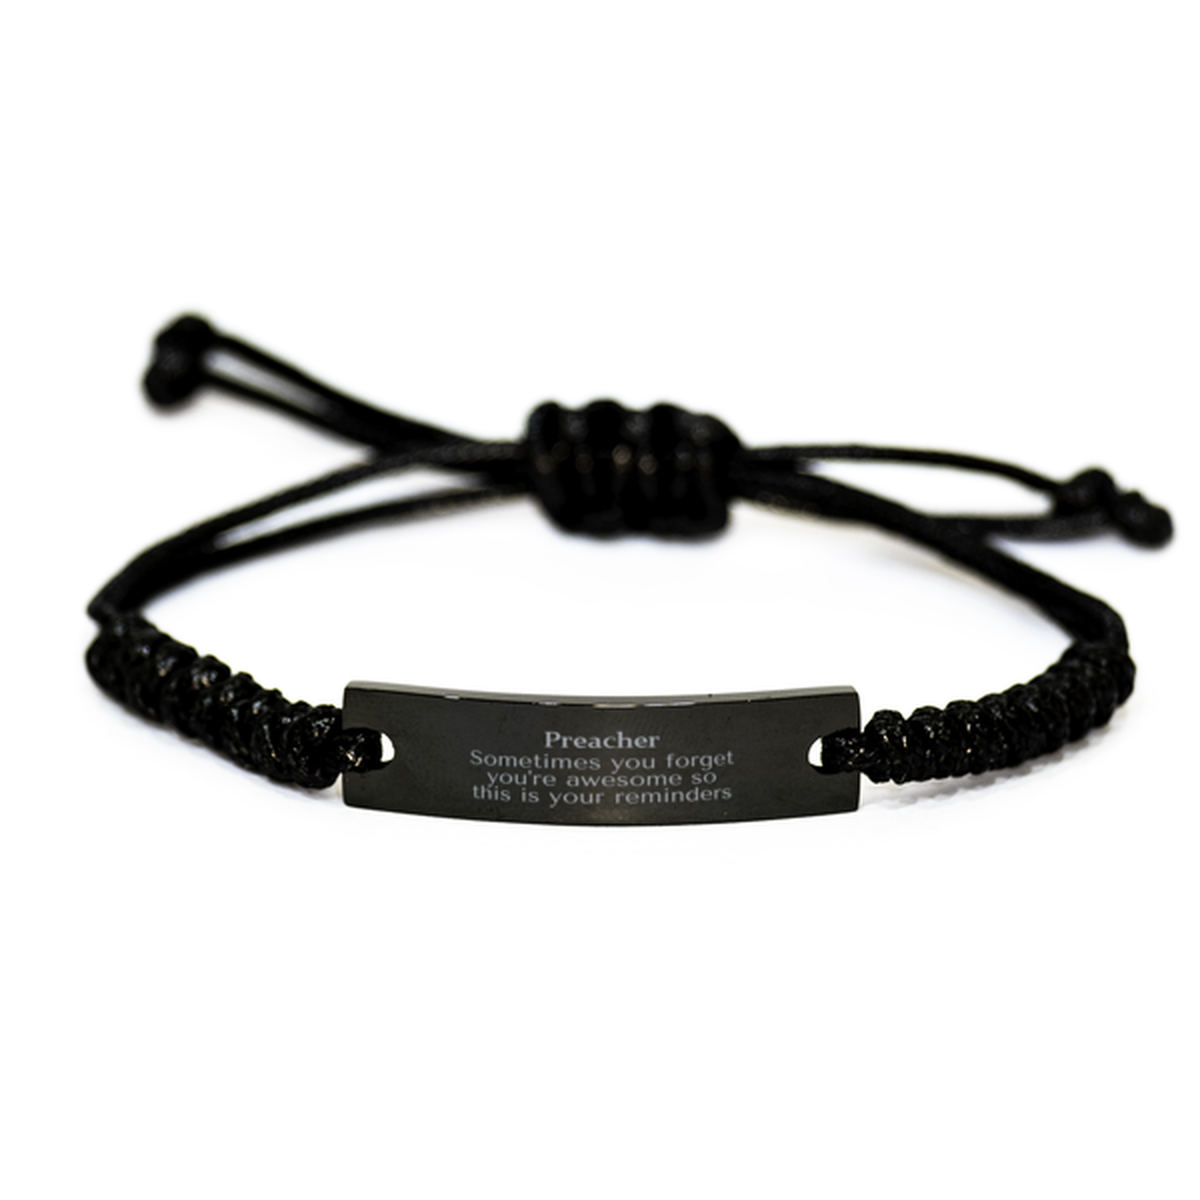 Sentimental Preacher Black Rope Bracelet, Preacher Sometimes you forget you're awesome so this is your reminders, Graduation Christmas Birthday Gifts for Preacher, Men, Women, Coworkers